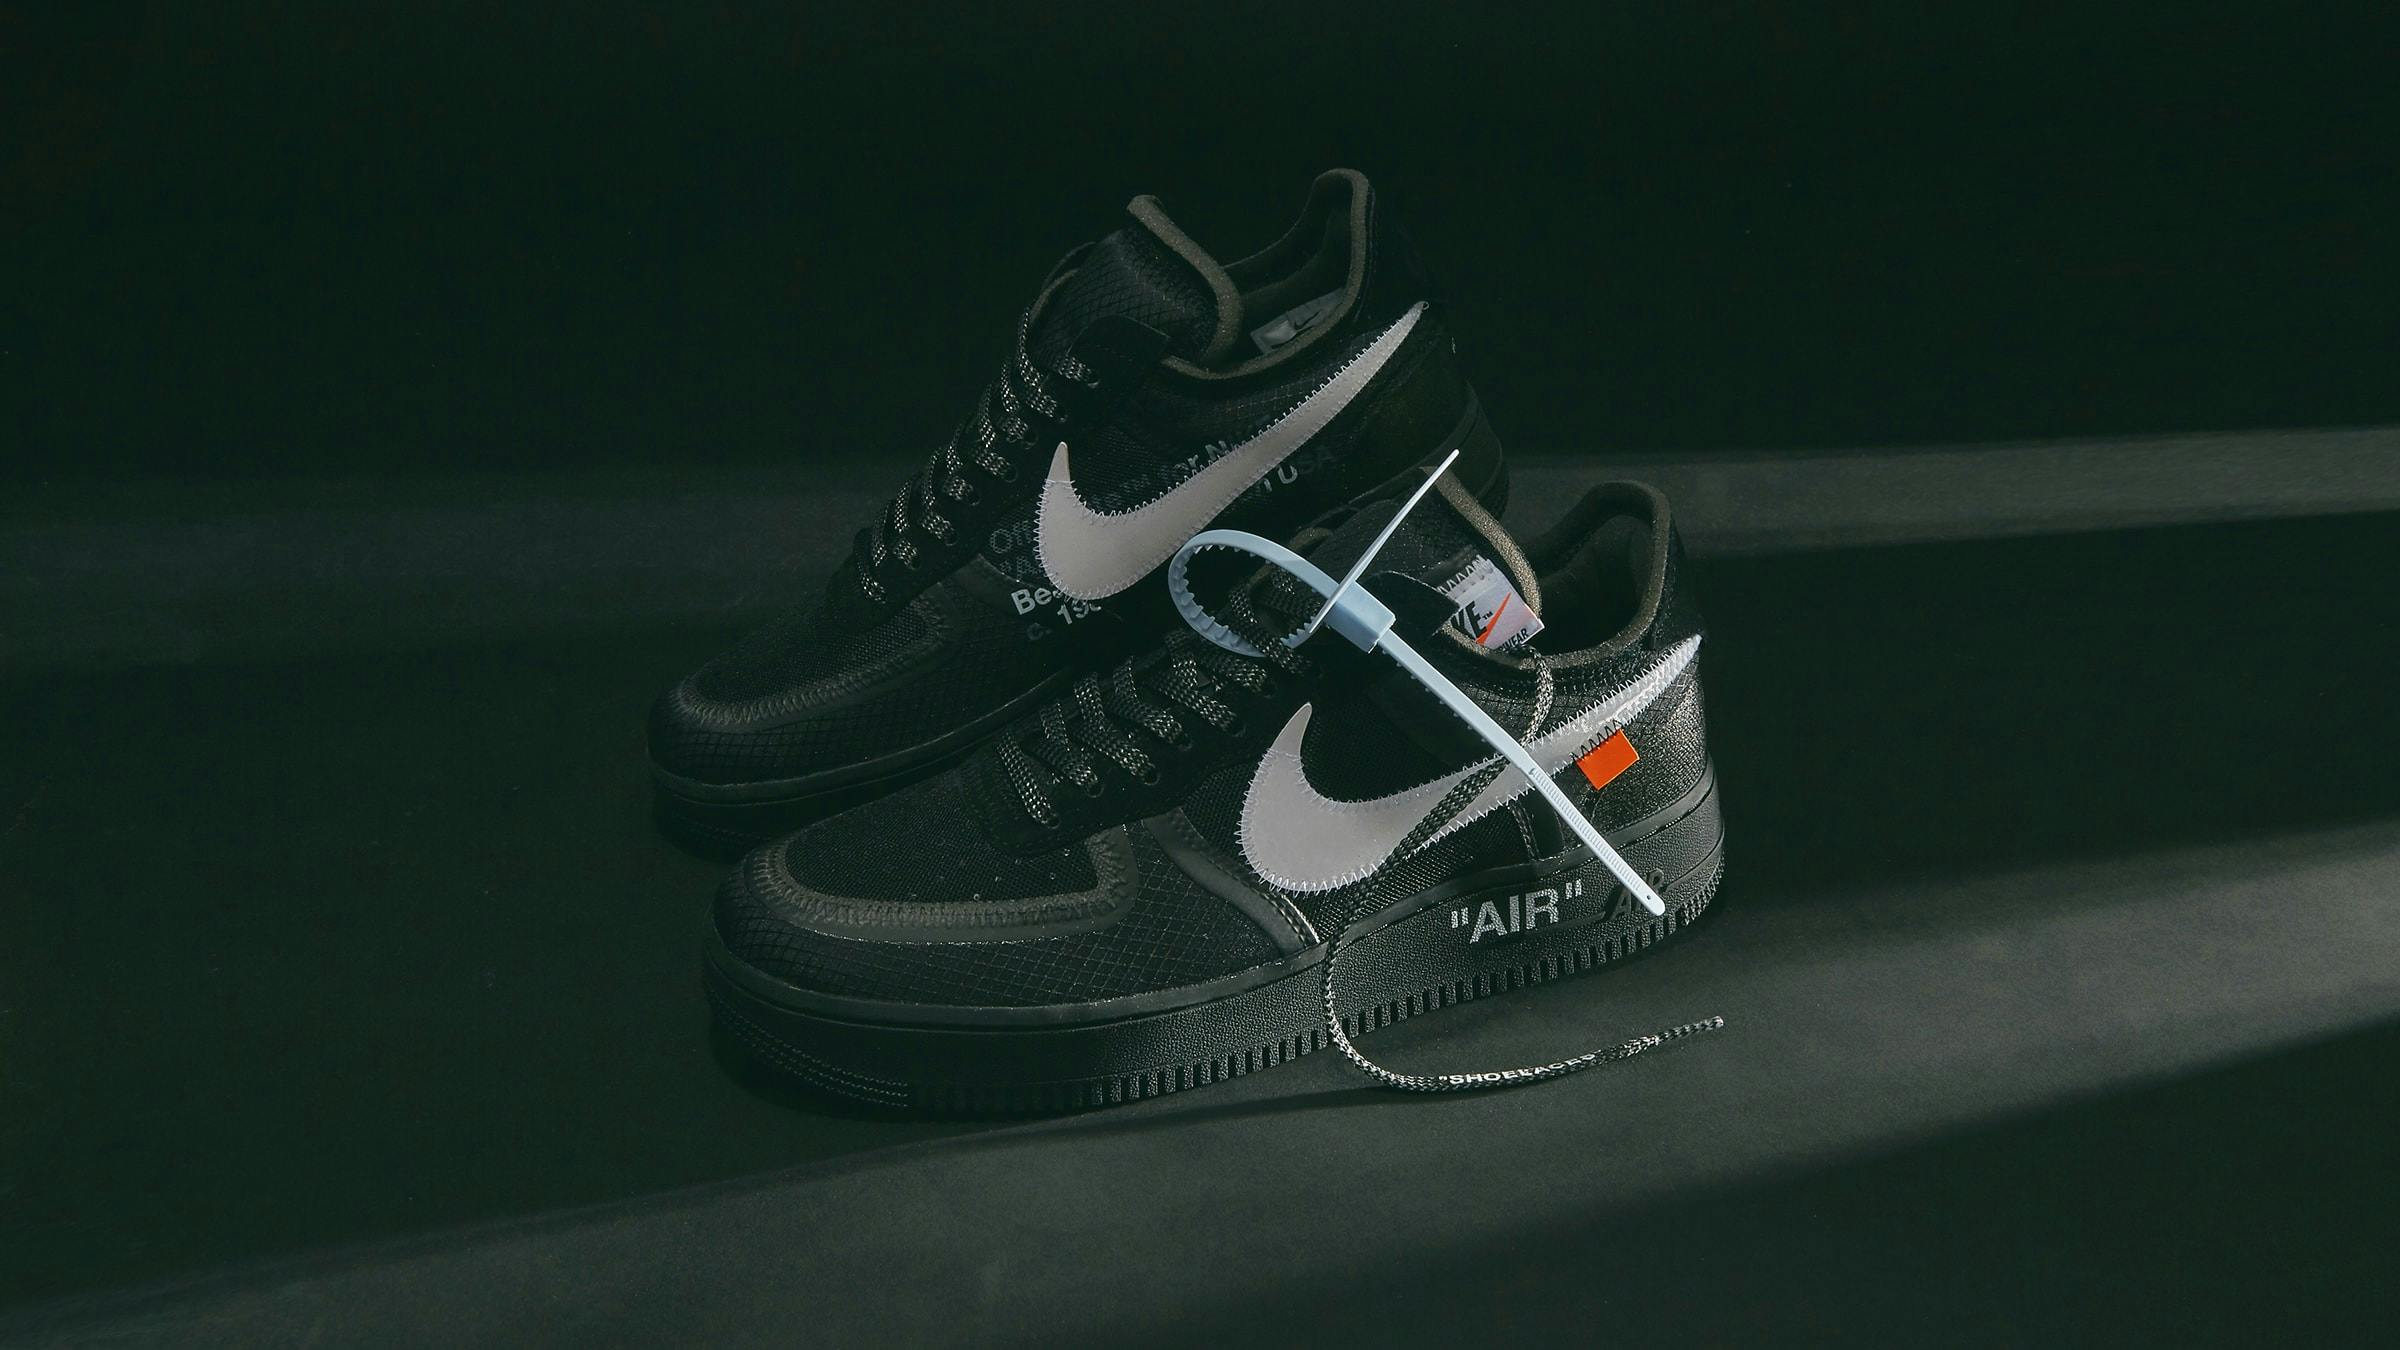 Virgil Abloh and Nike Announce New Design Project “The10” - NIKE